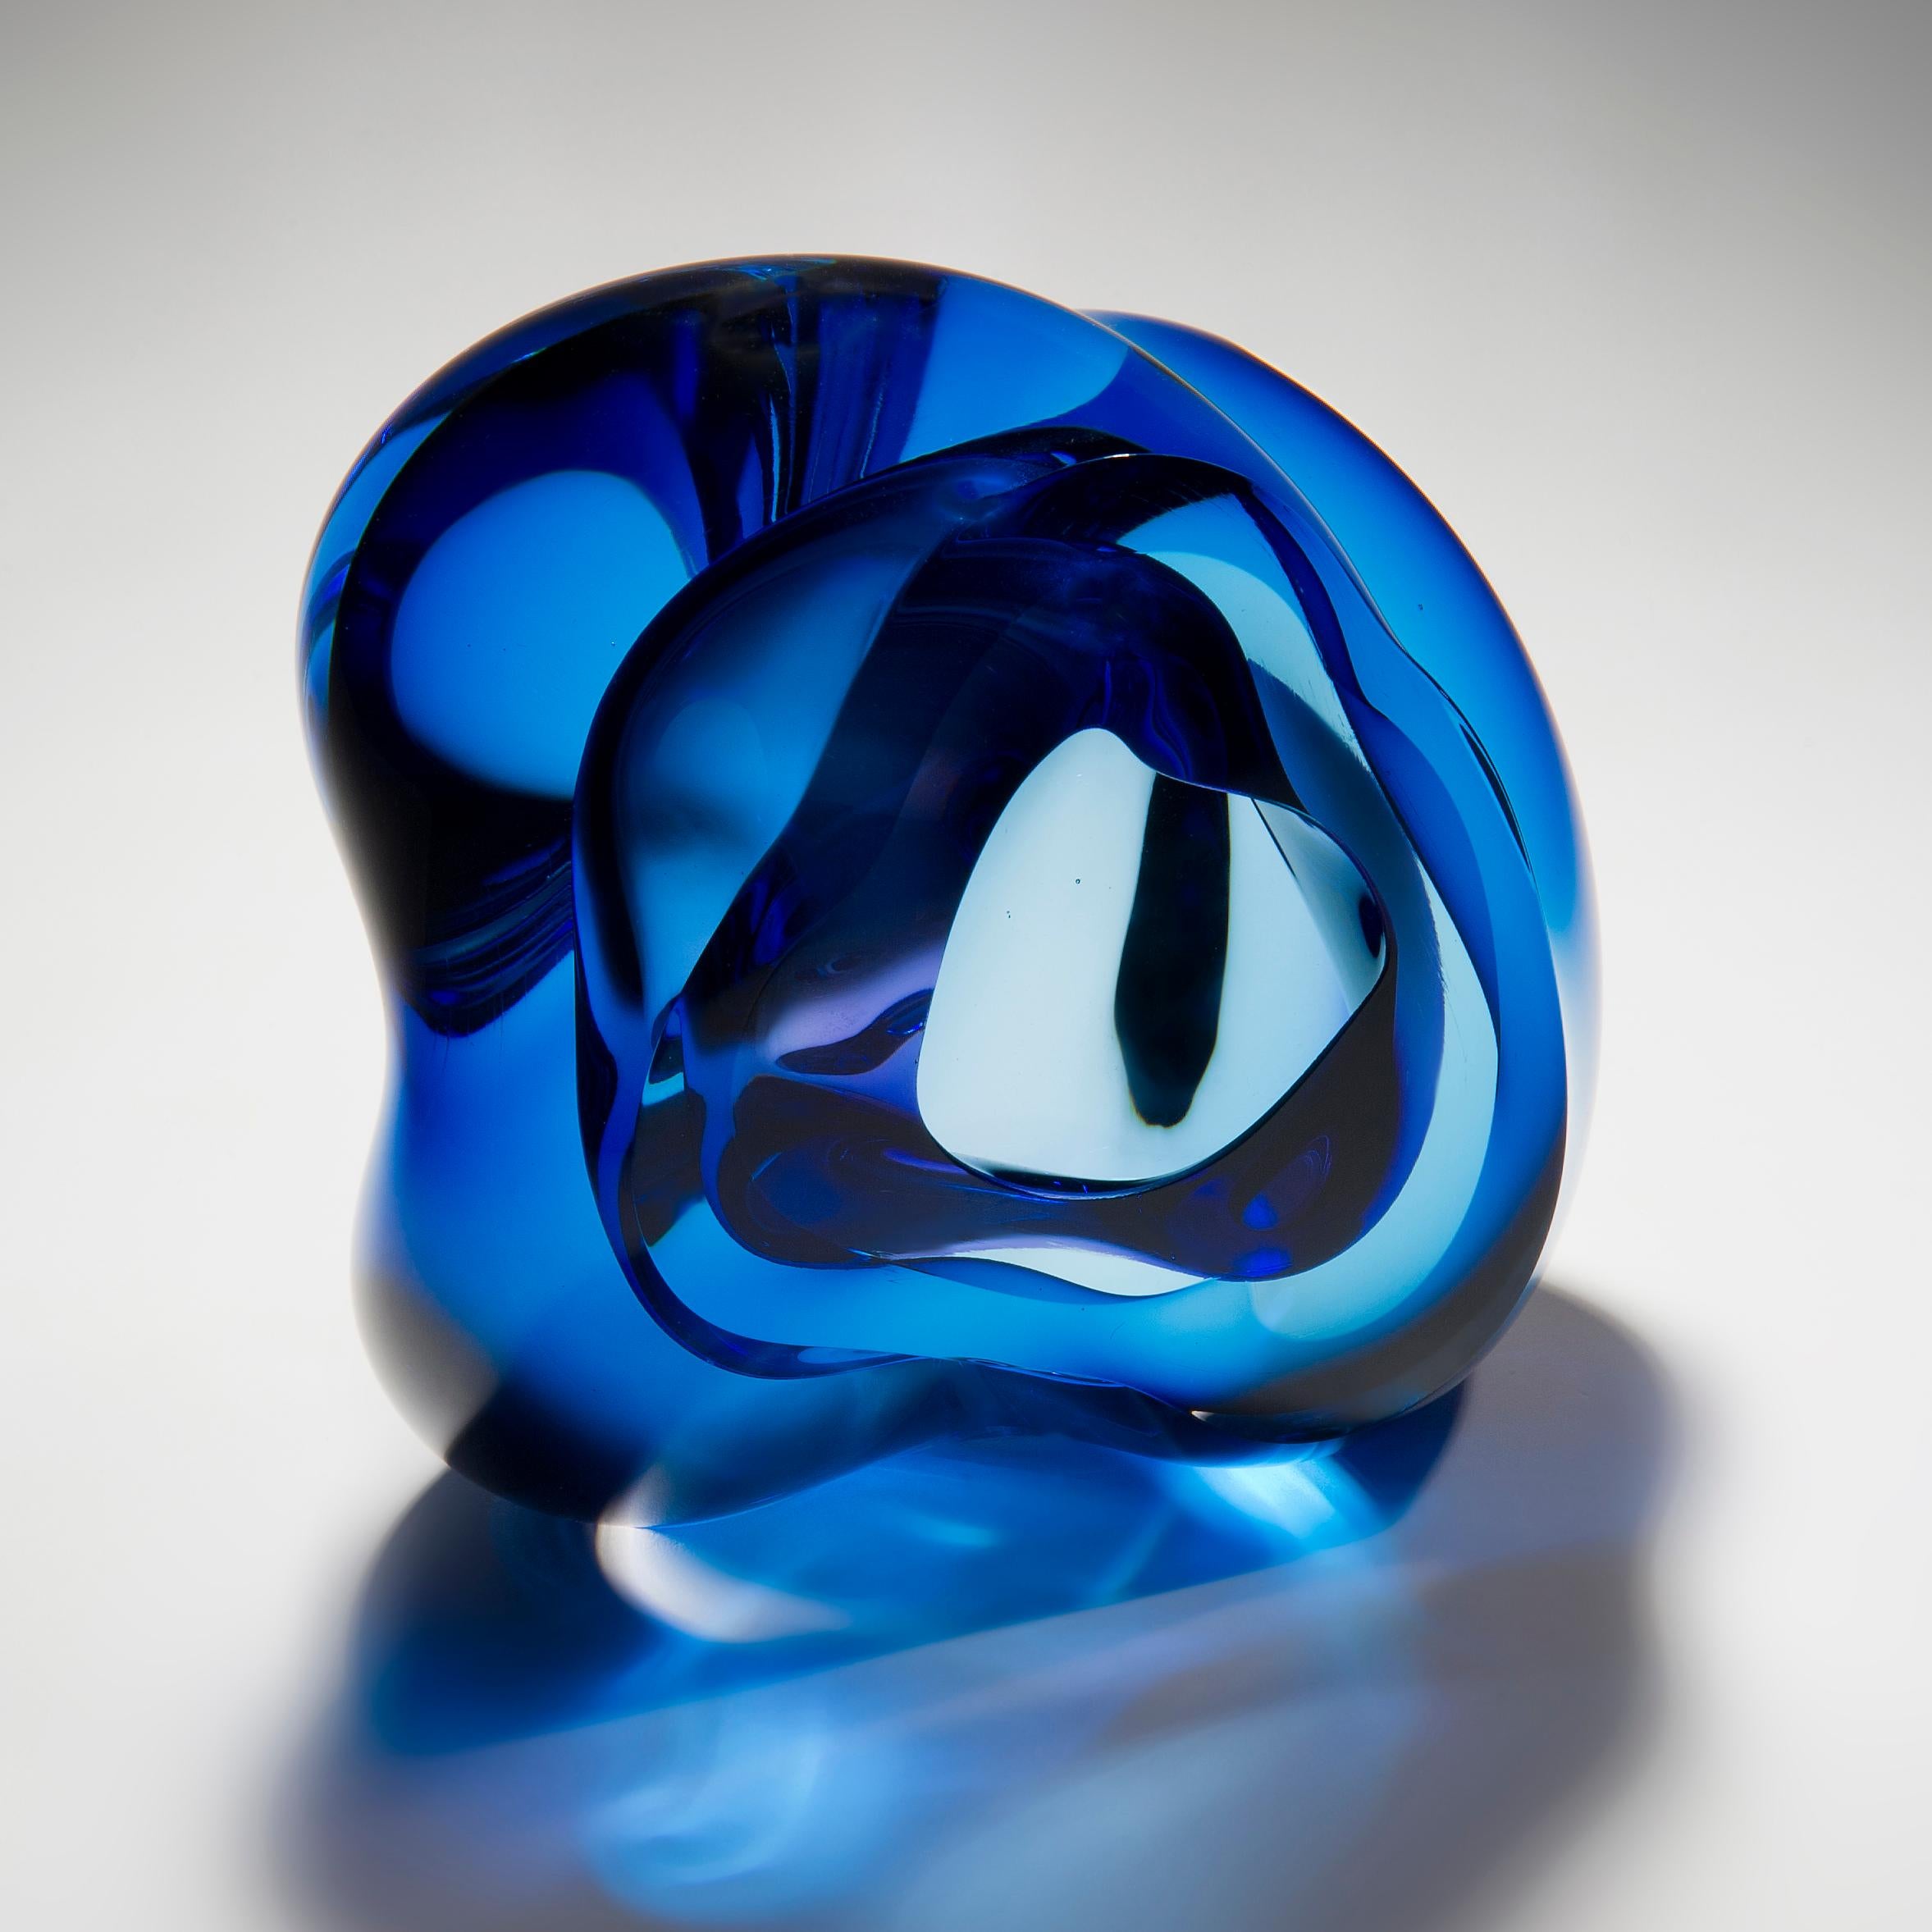 Organic Modern Vug in Blue and Hyacinth, a Unique Glass Sculpture by Samantha Donaldson